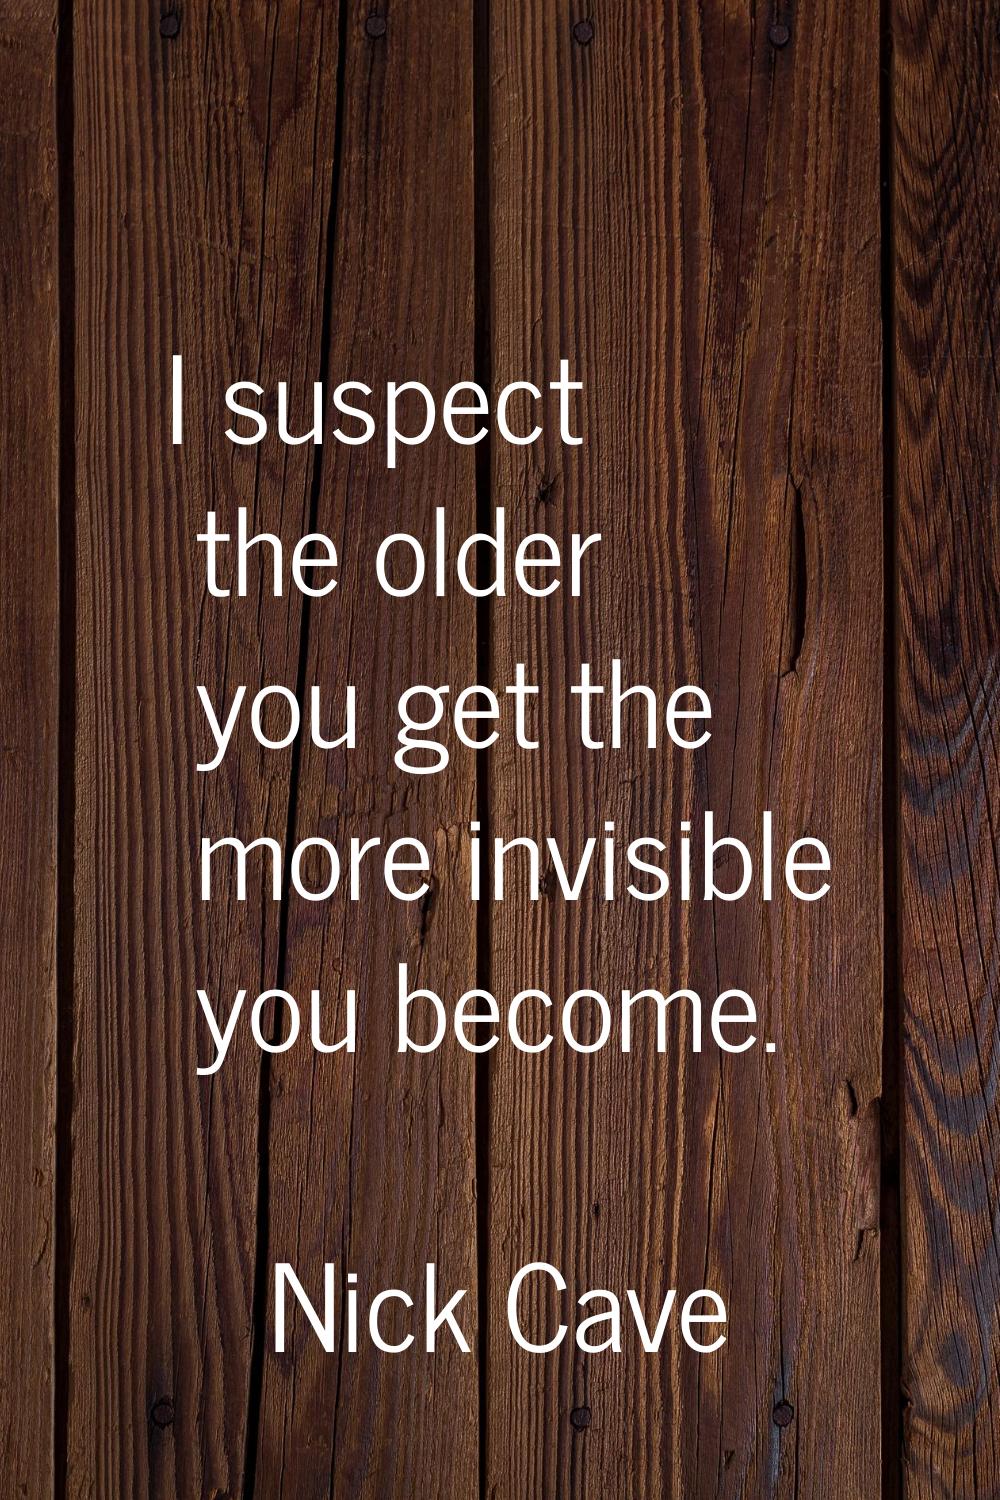 I suspect the older you get the more invisible you become.